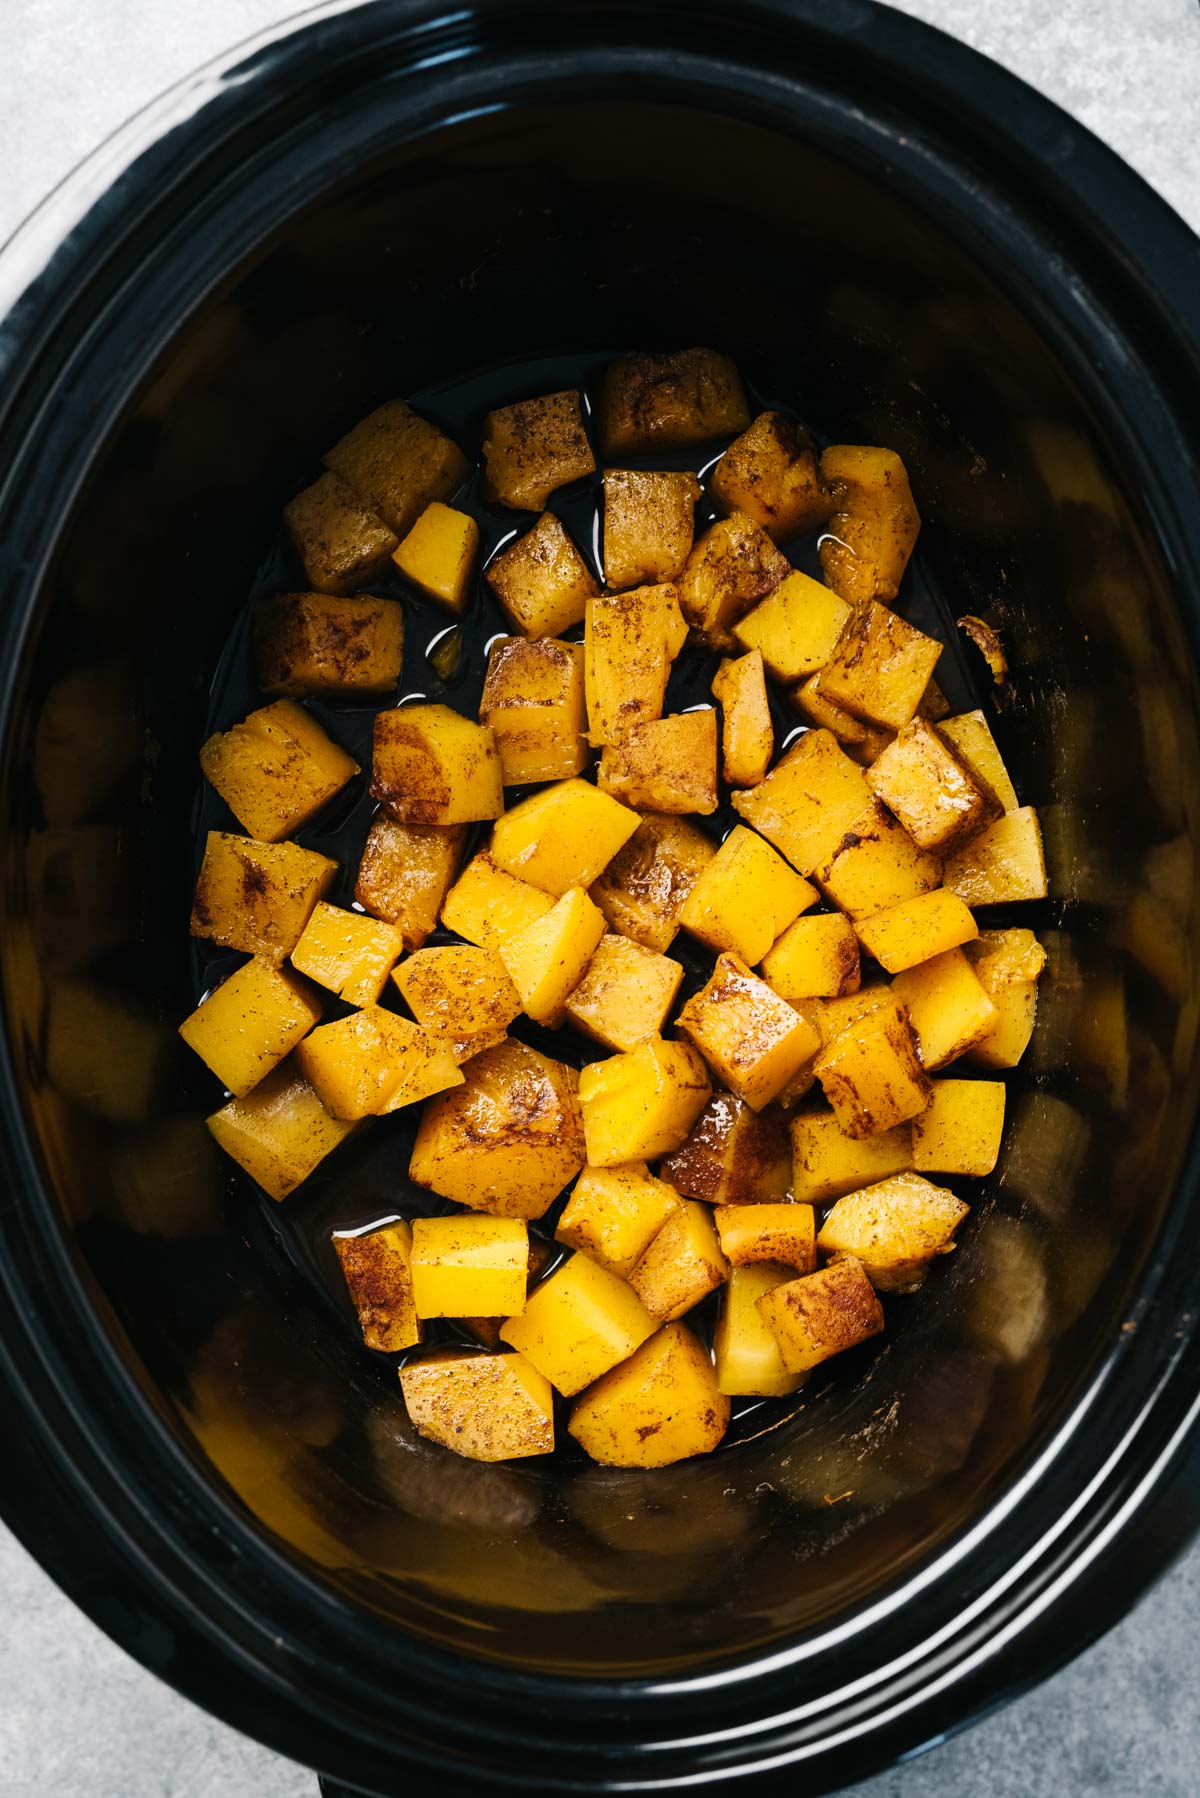 Slow cooked butternut squash cubes in a crockpot, seasoned with brown sugar and warming spices.